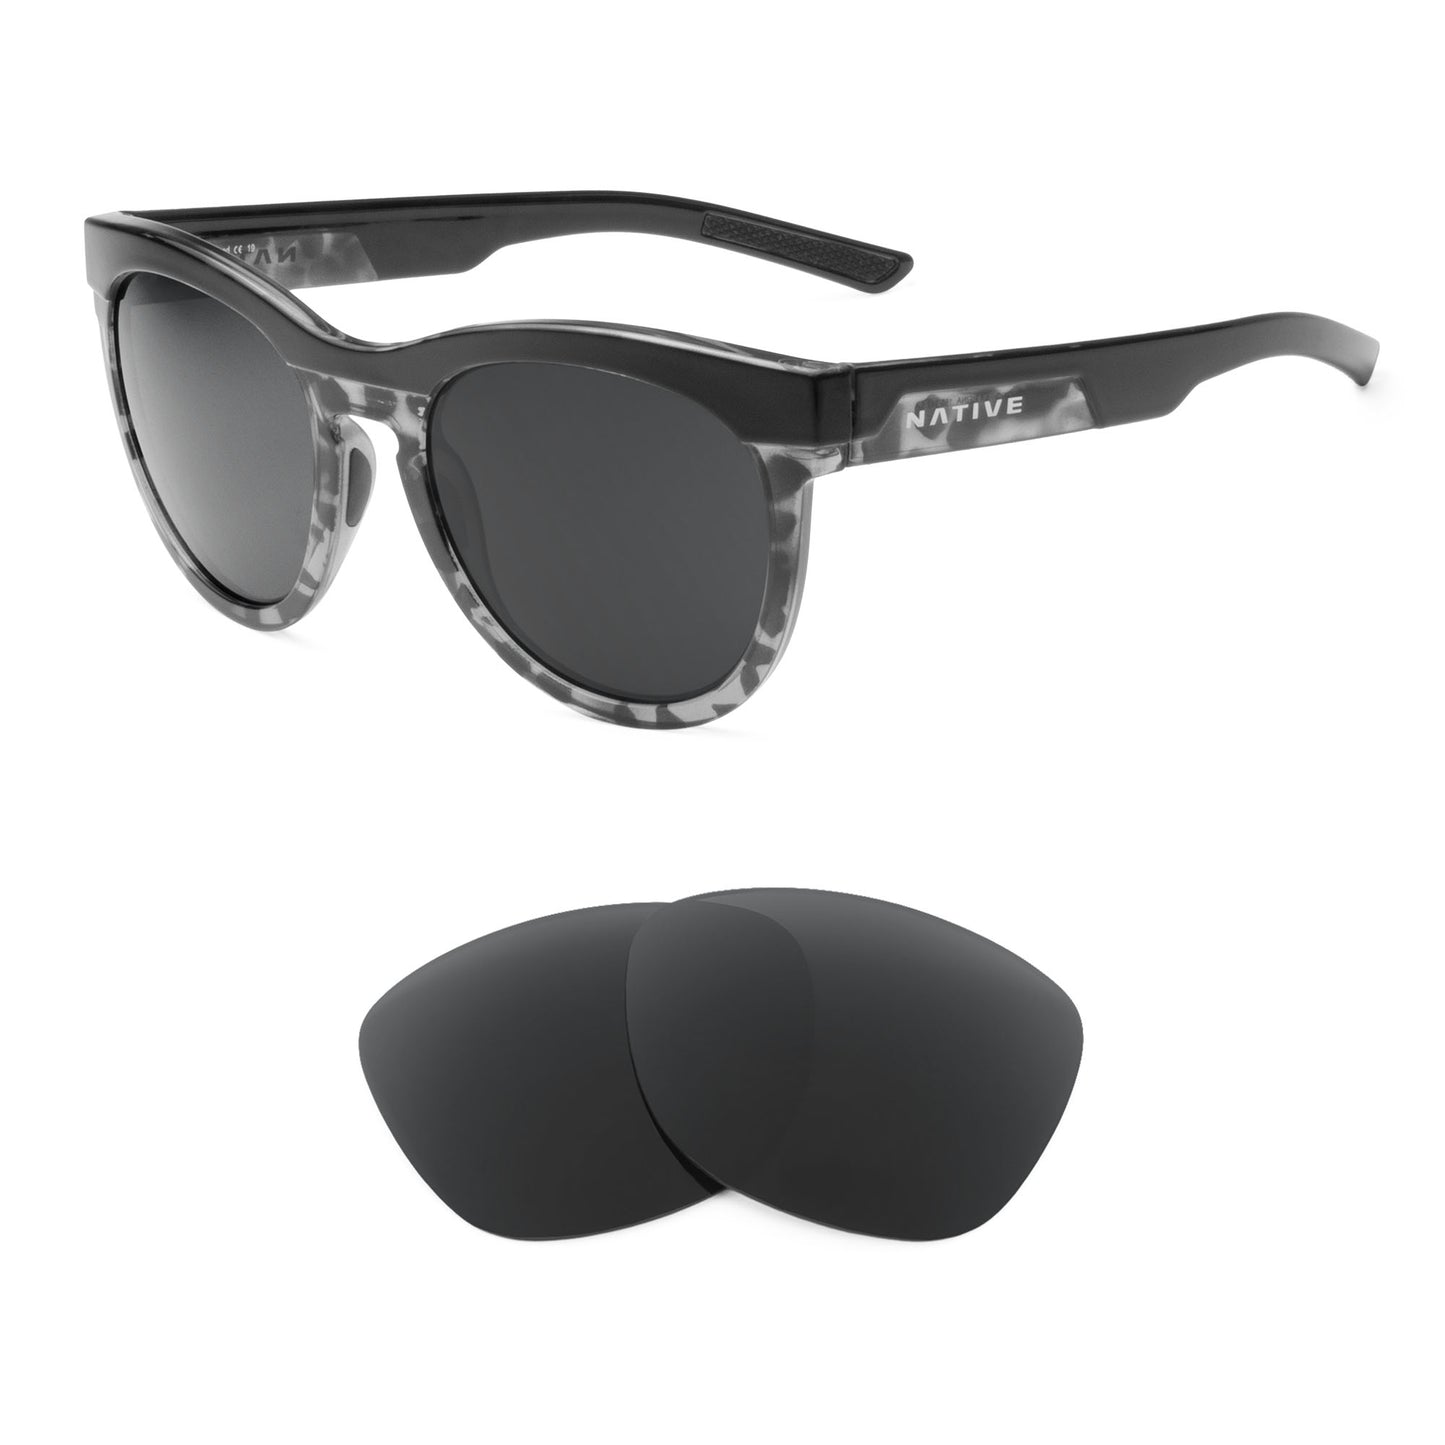 Native La Reina sunglasses with replacement lenses